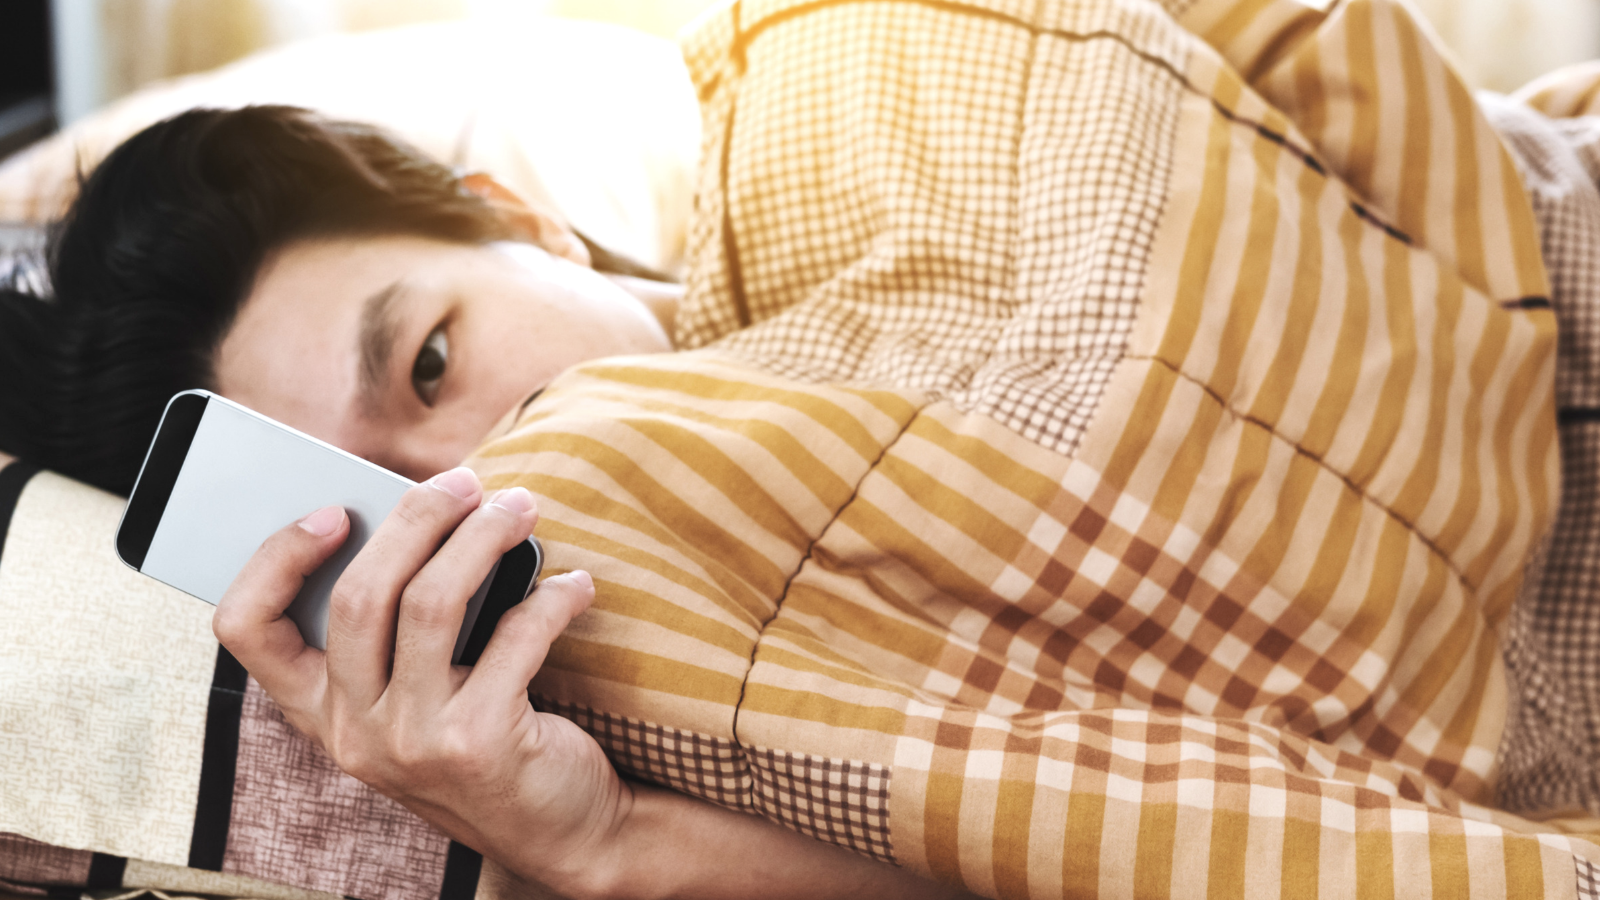 Teen in bed looking at cell phone